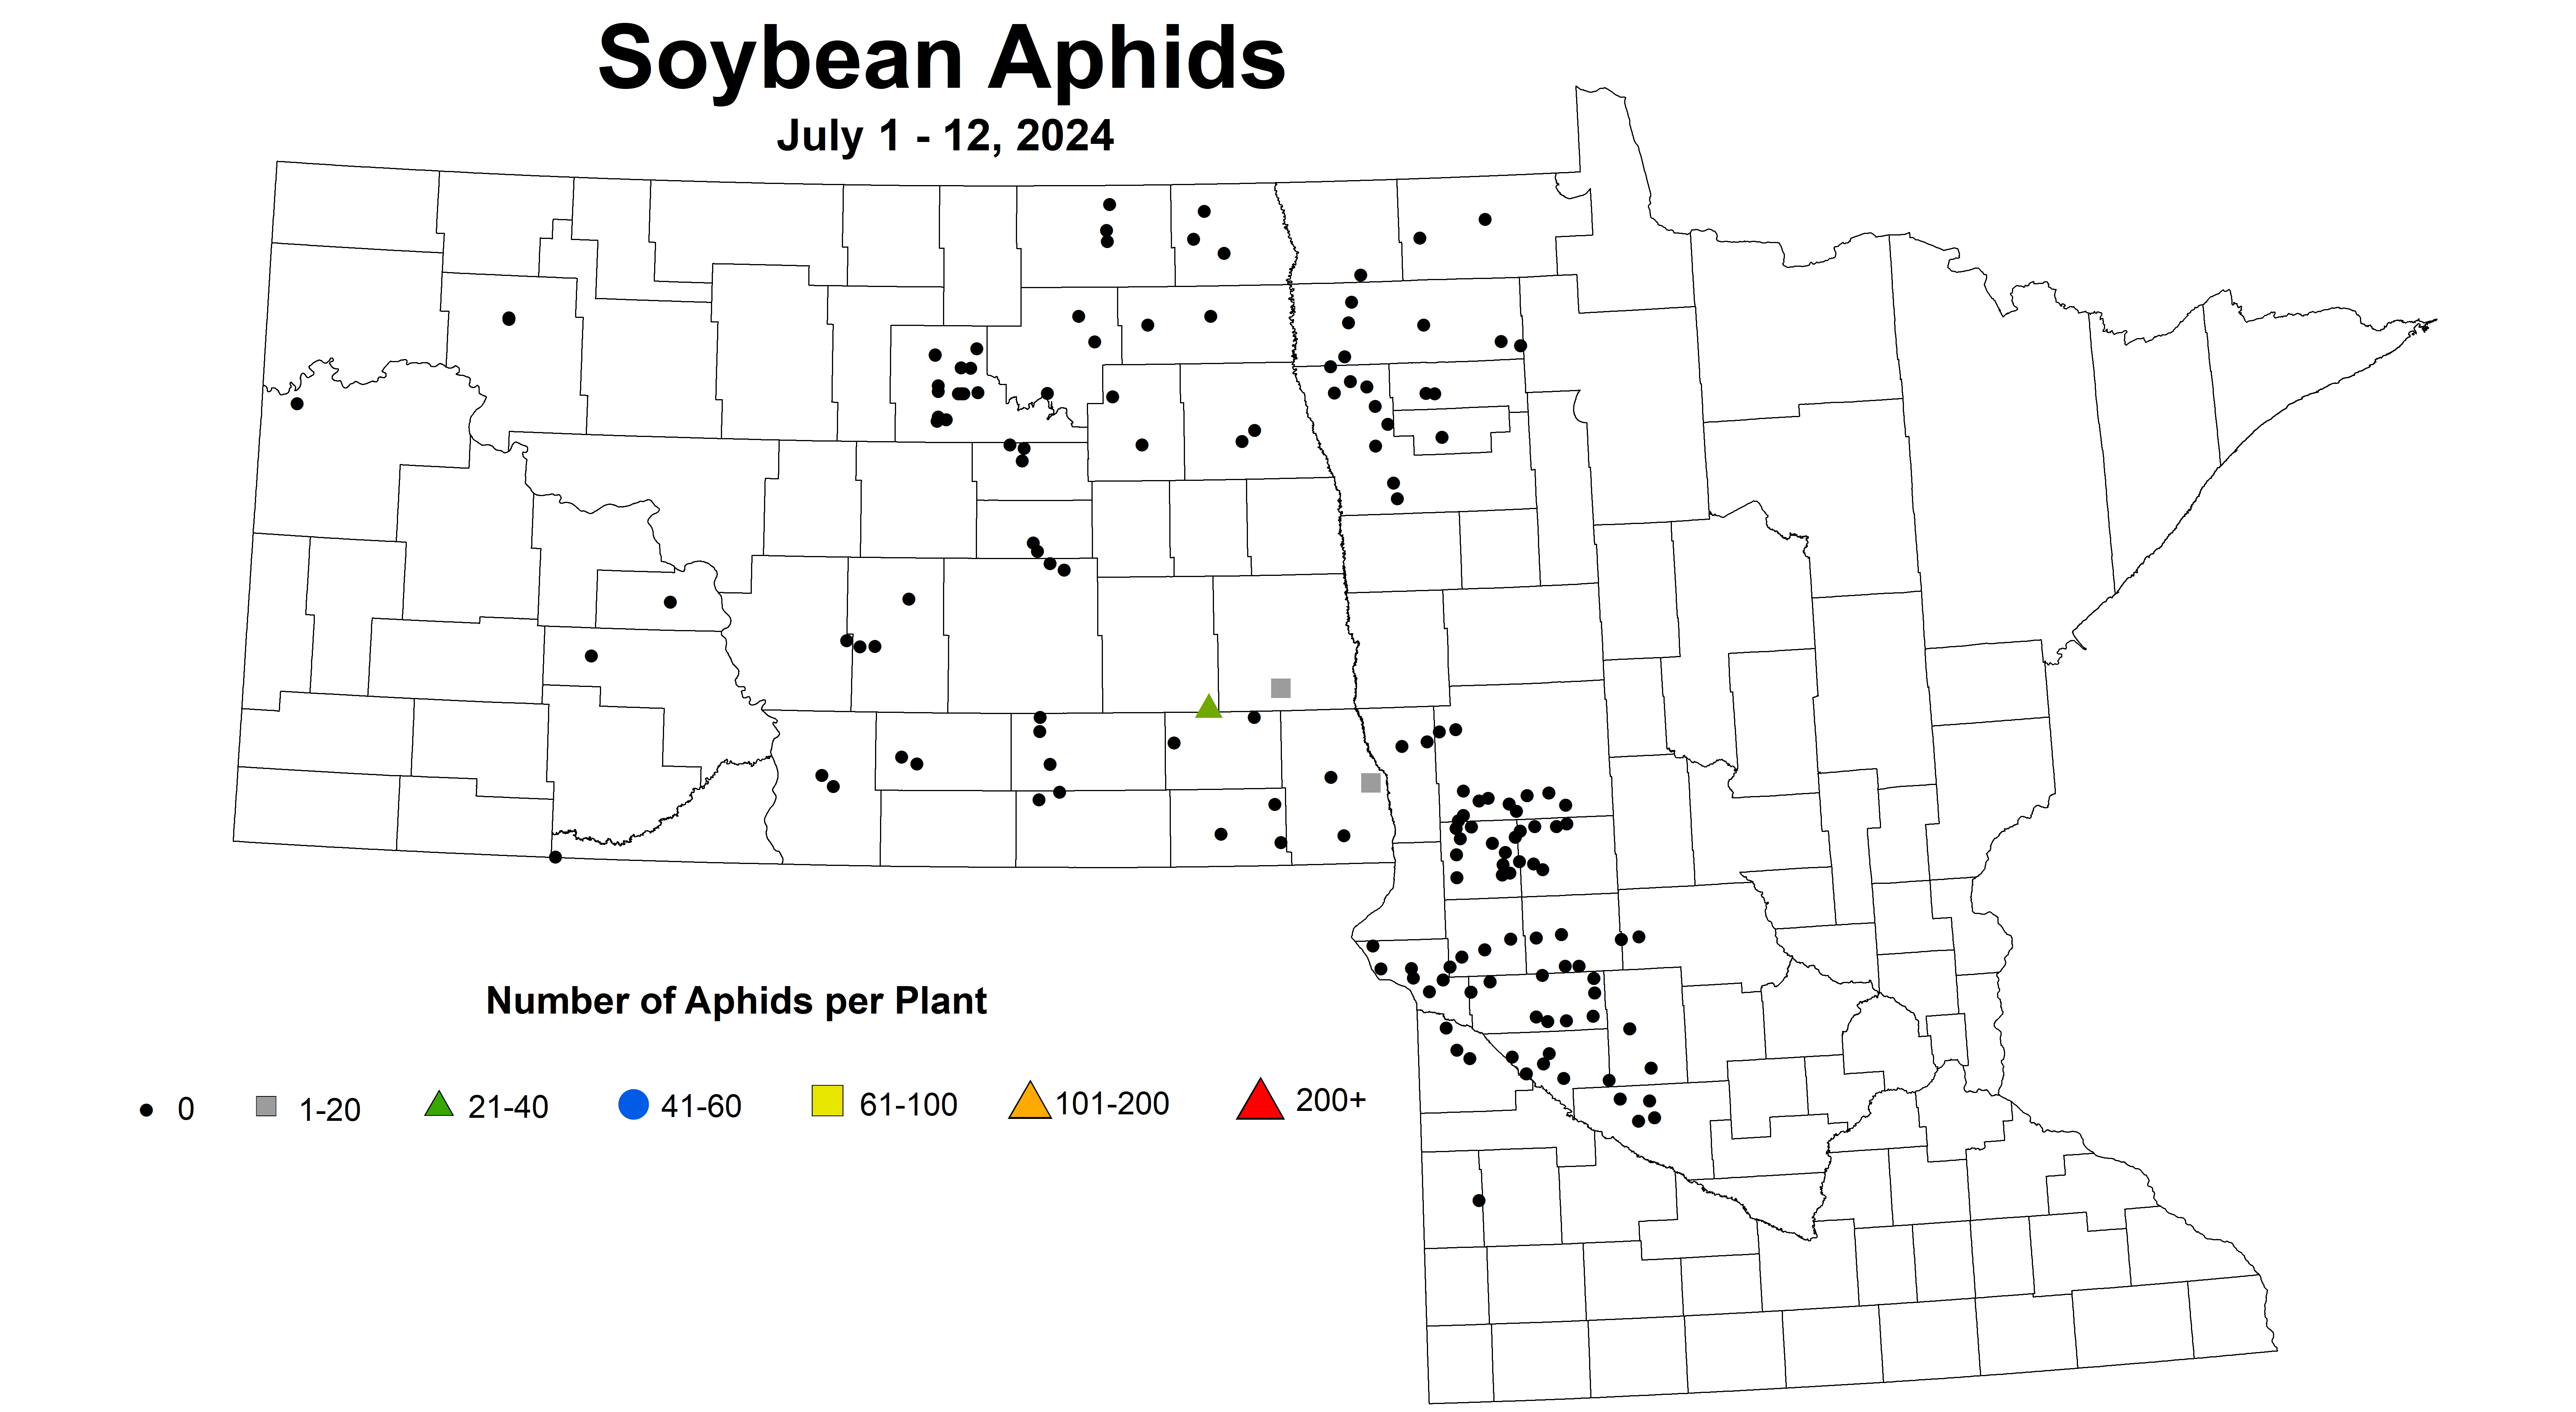 soybean aphids number July 1-12 2024